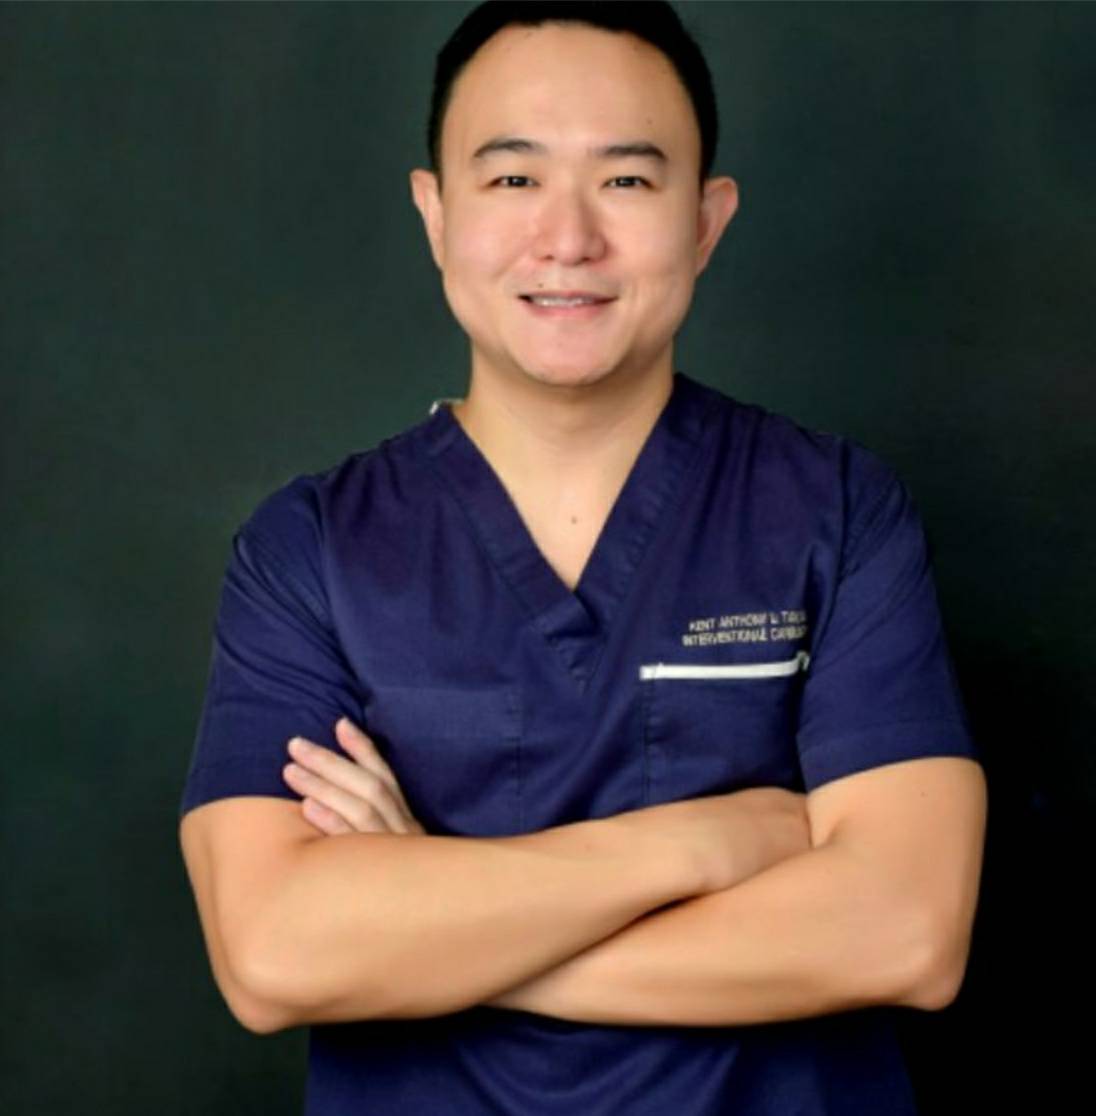 Dr. Kent Tan trained as an interventional cardiologist at Singapore’s National University Hospital. He recently came back from a clinical fellowship in interventional cardiology at the National University Heart Centre, also  in Singapore. 